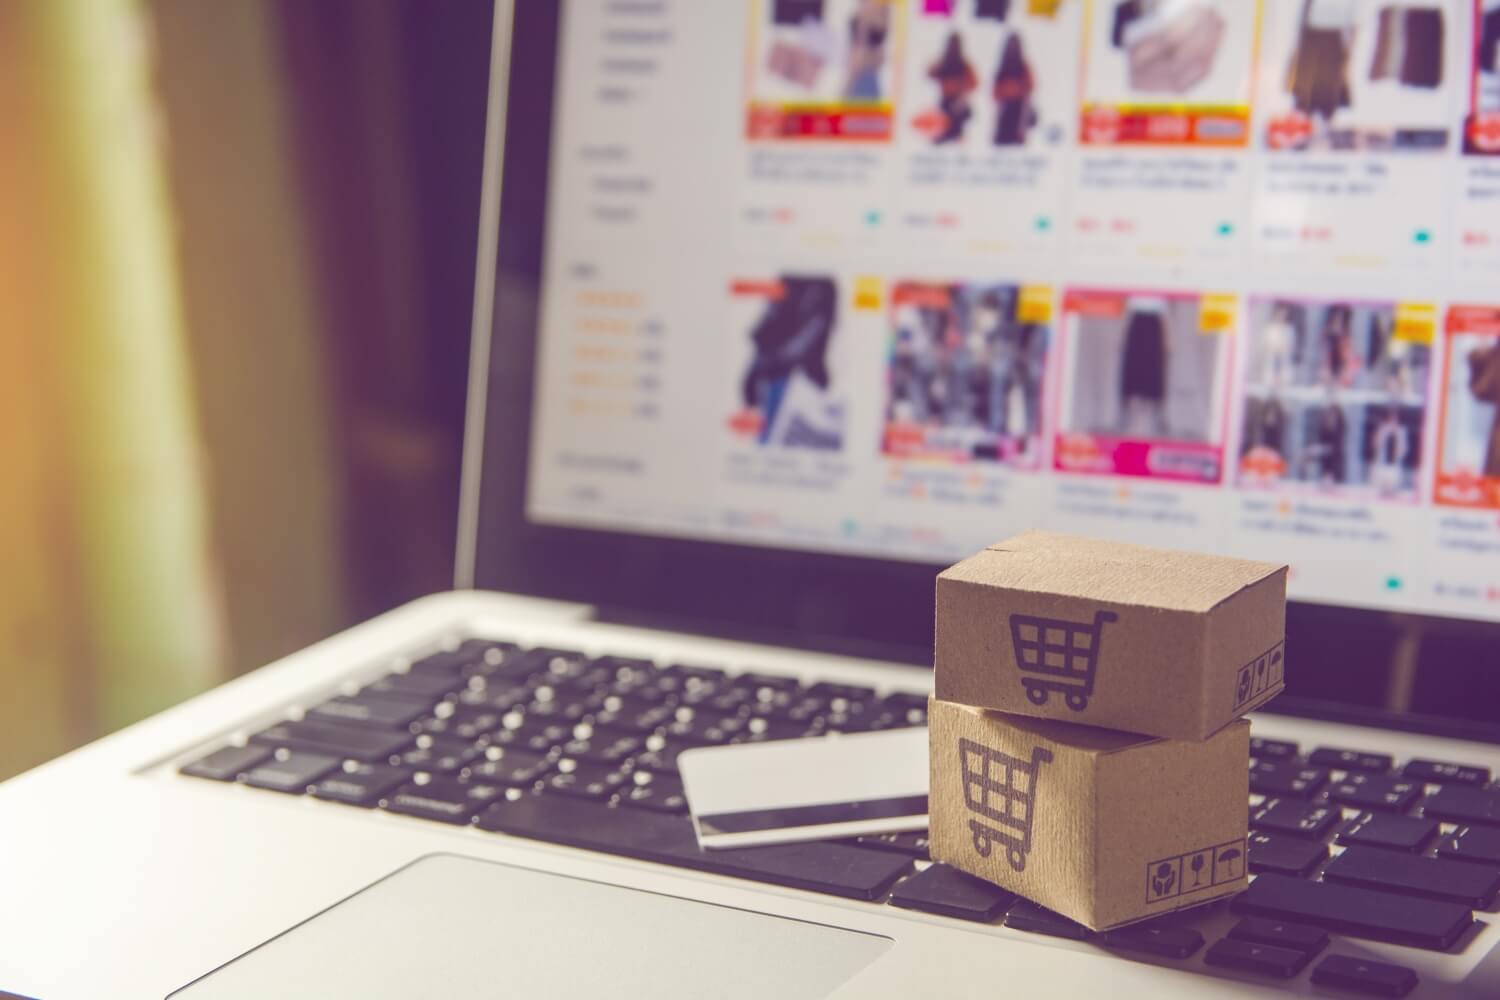 US e-commerce sales up 49 percent in April, led by boom in grocery category